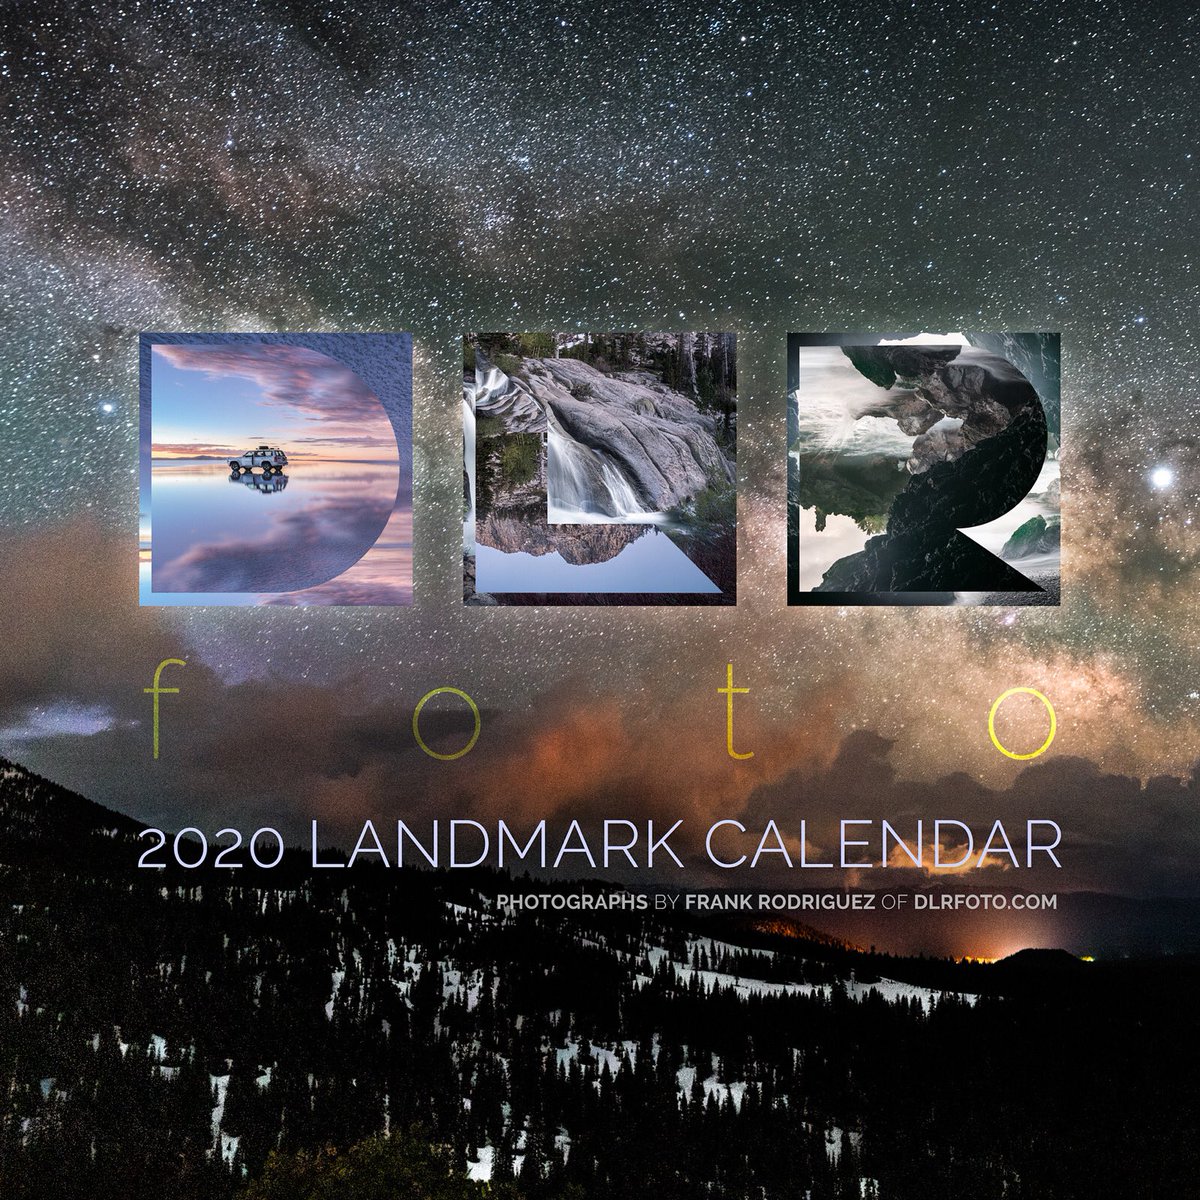 Sky pie sliver. Limited run. Buzzer beater steez. Holidays closing in ftw. 
DM for pre-pre-order. 

#calendar2020 
#landscapephotography 
#kyoto
#sanfrancisco 
#potosi 
#rapanui 
#hawaii 
#easternsierra 
#monocounty
#california 
#sonyphotography 
#inyonationalforest 
#dlrfoto